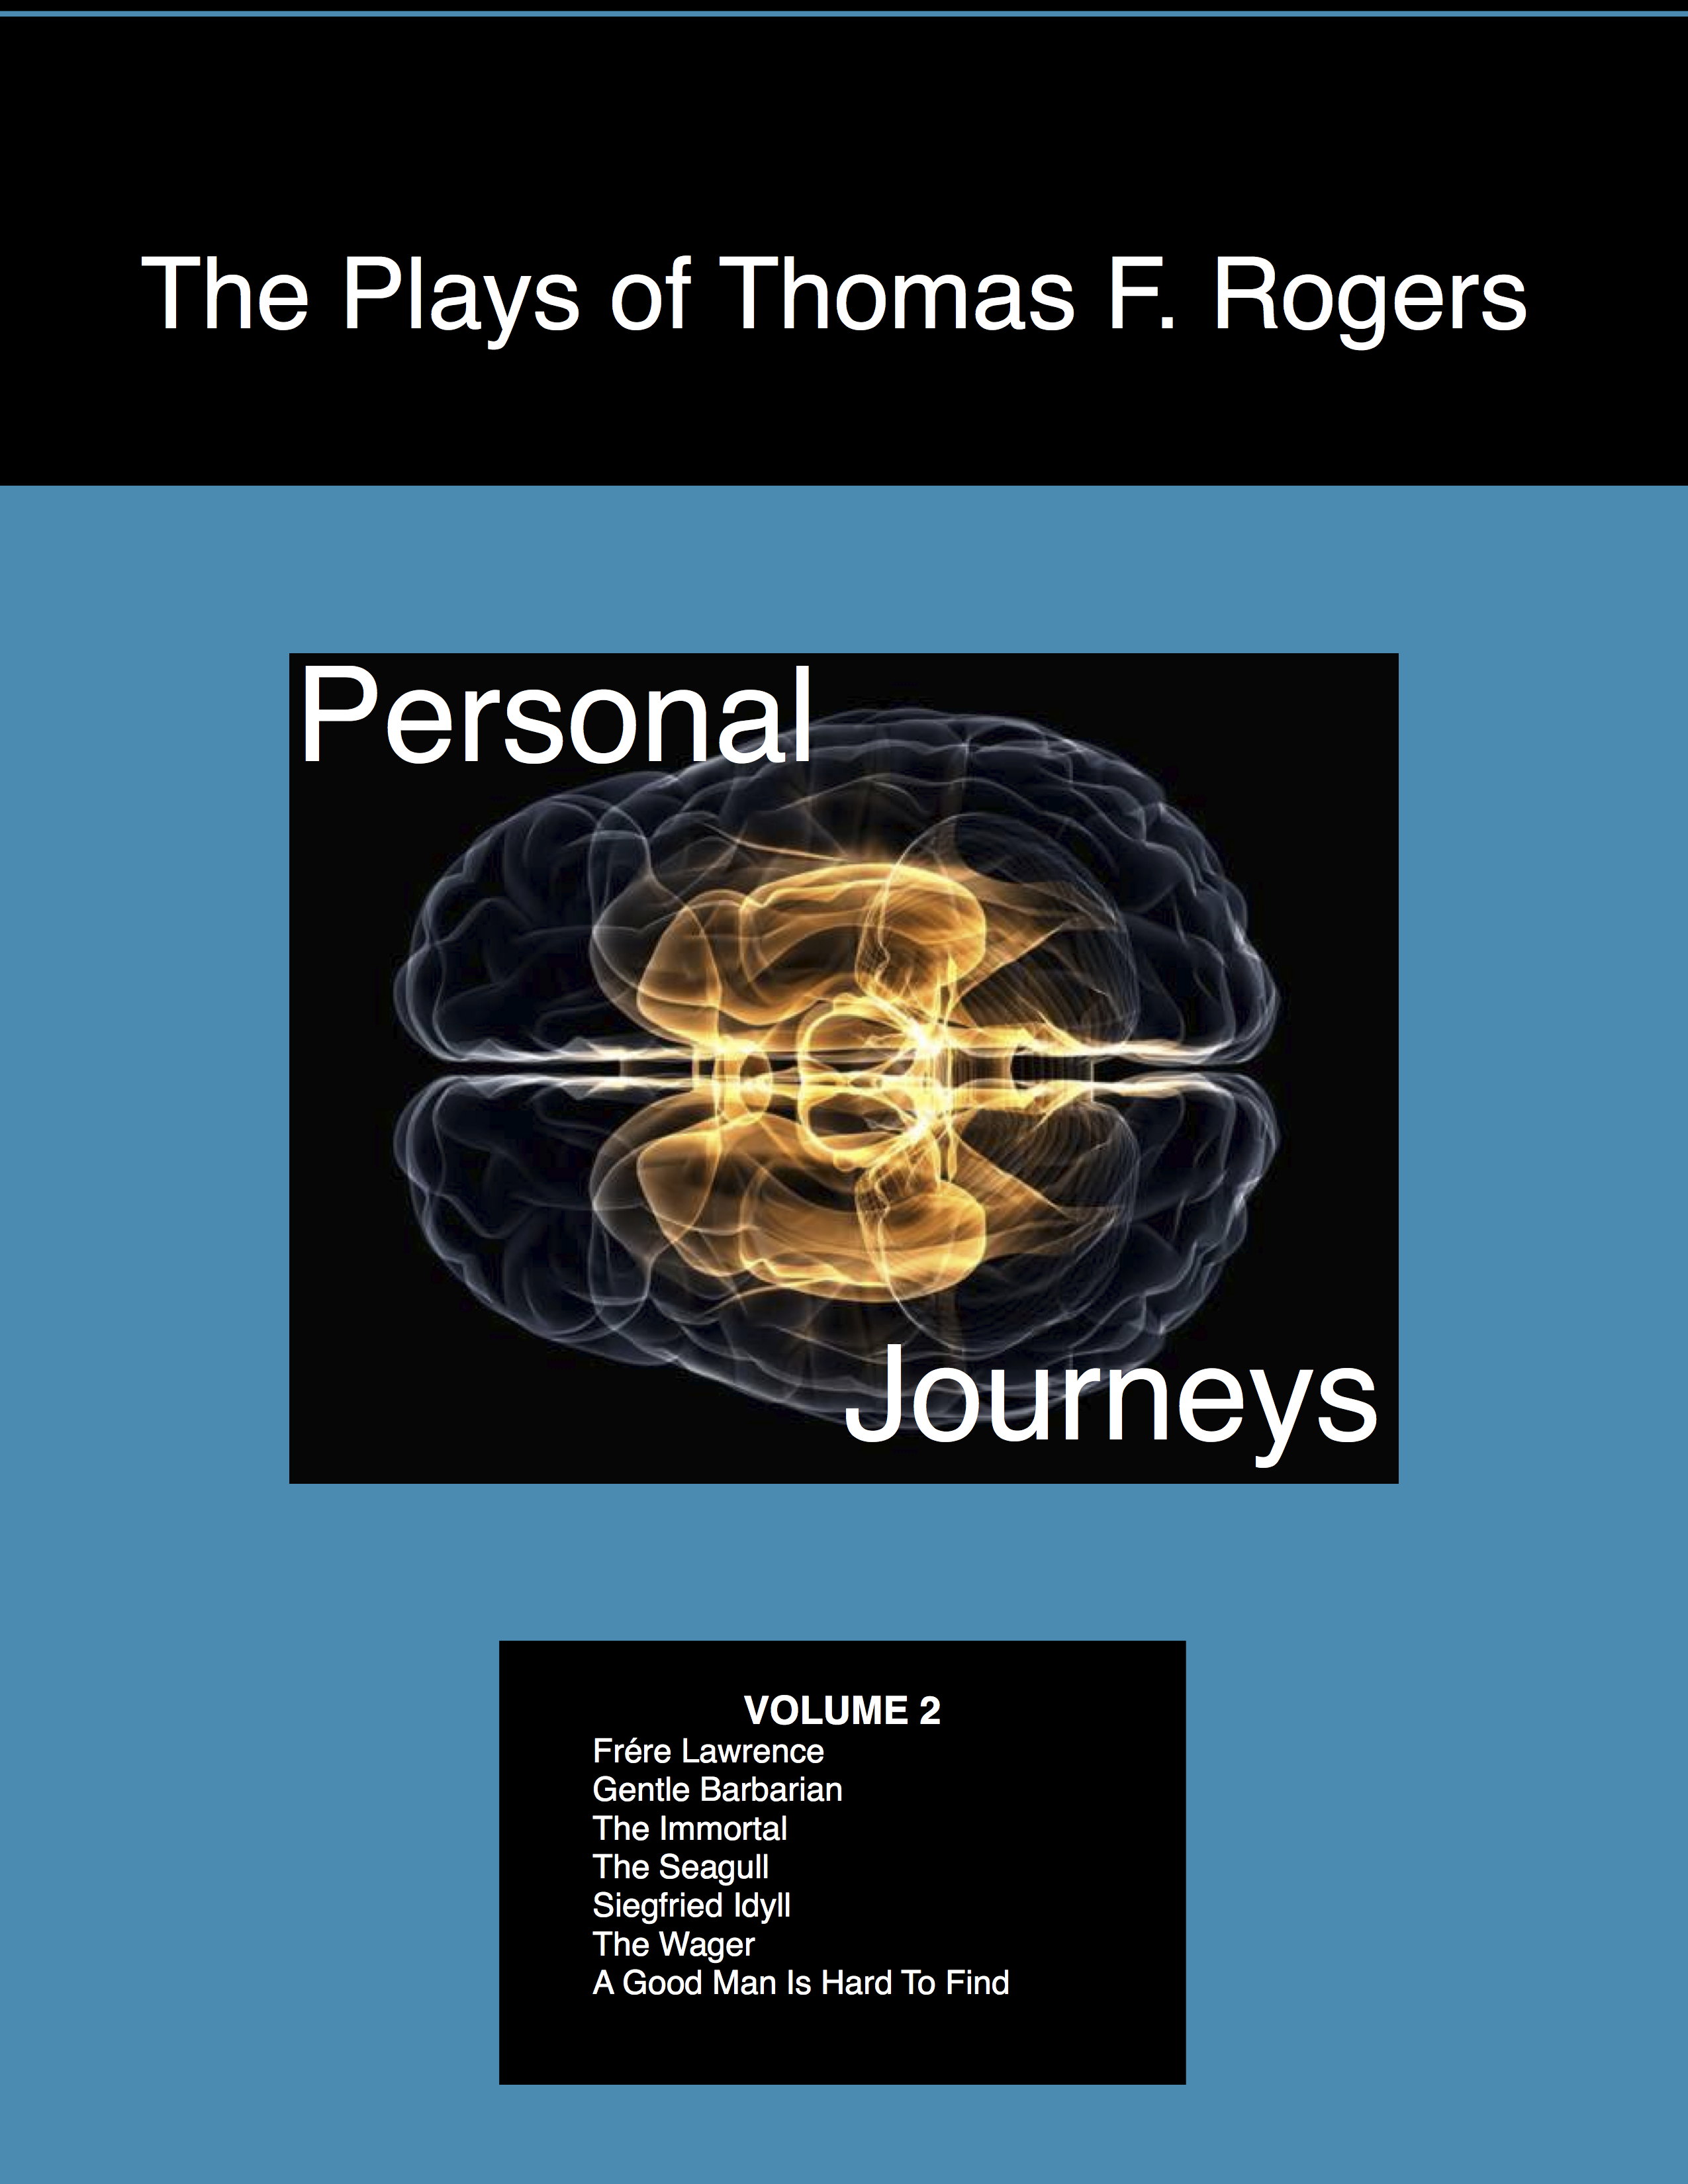 The Plays of Thomas F. Rogers Volume 2: Personal Journeys